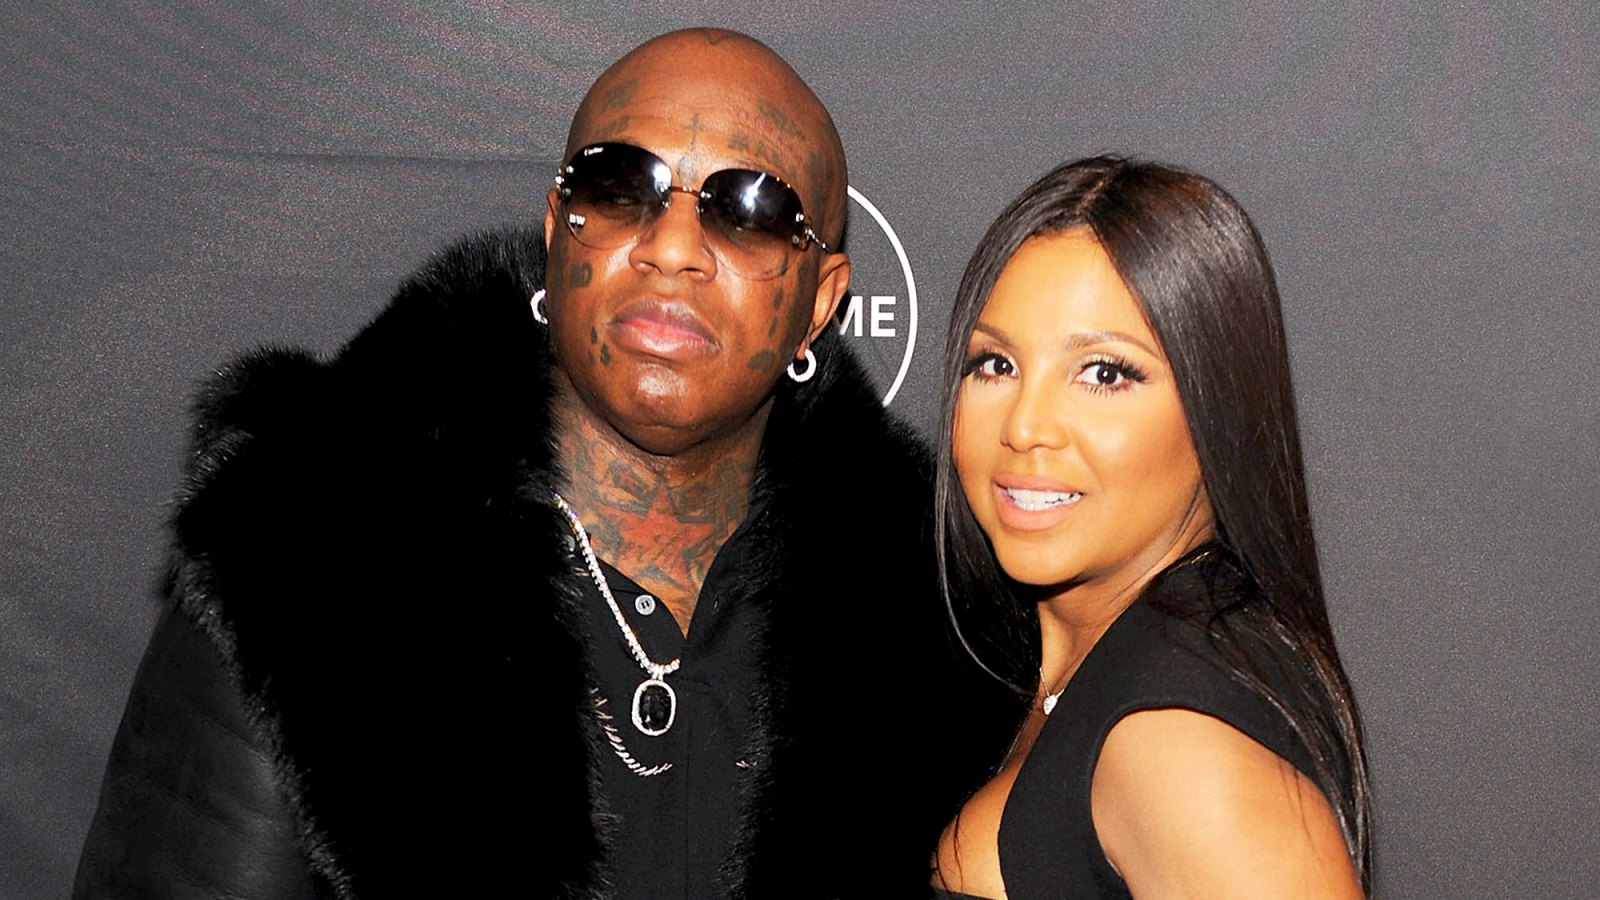 Birdman and Toni Braxton attends Lifetime"s Film,"Faith Under Fire: The Antoinette Tuff Story" red carpet 2018 screening and premiere event at NeueHouse Madison Square in New York City.